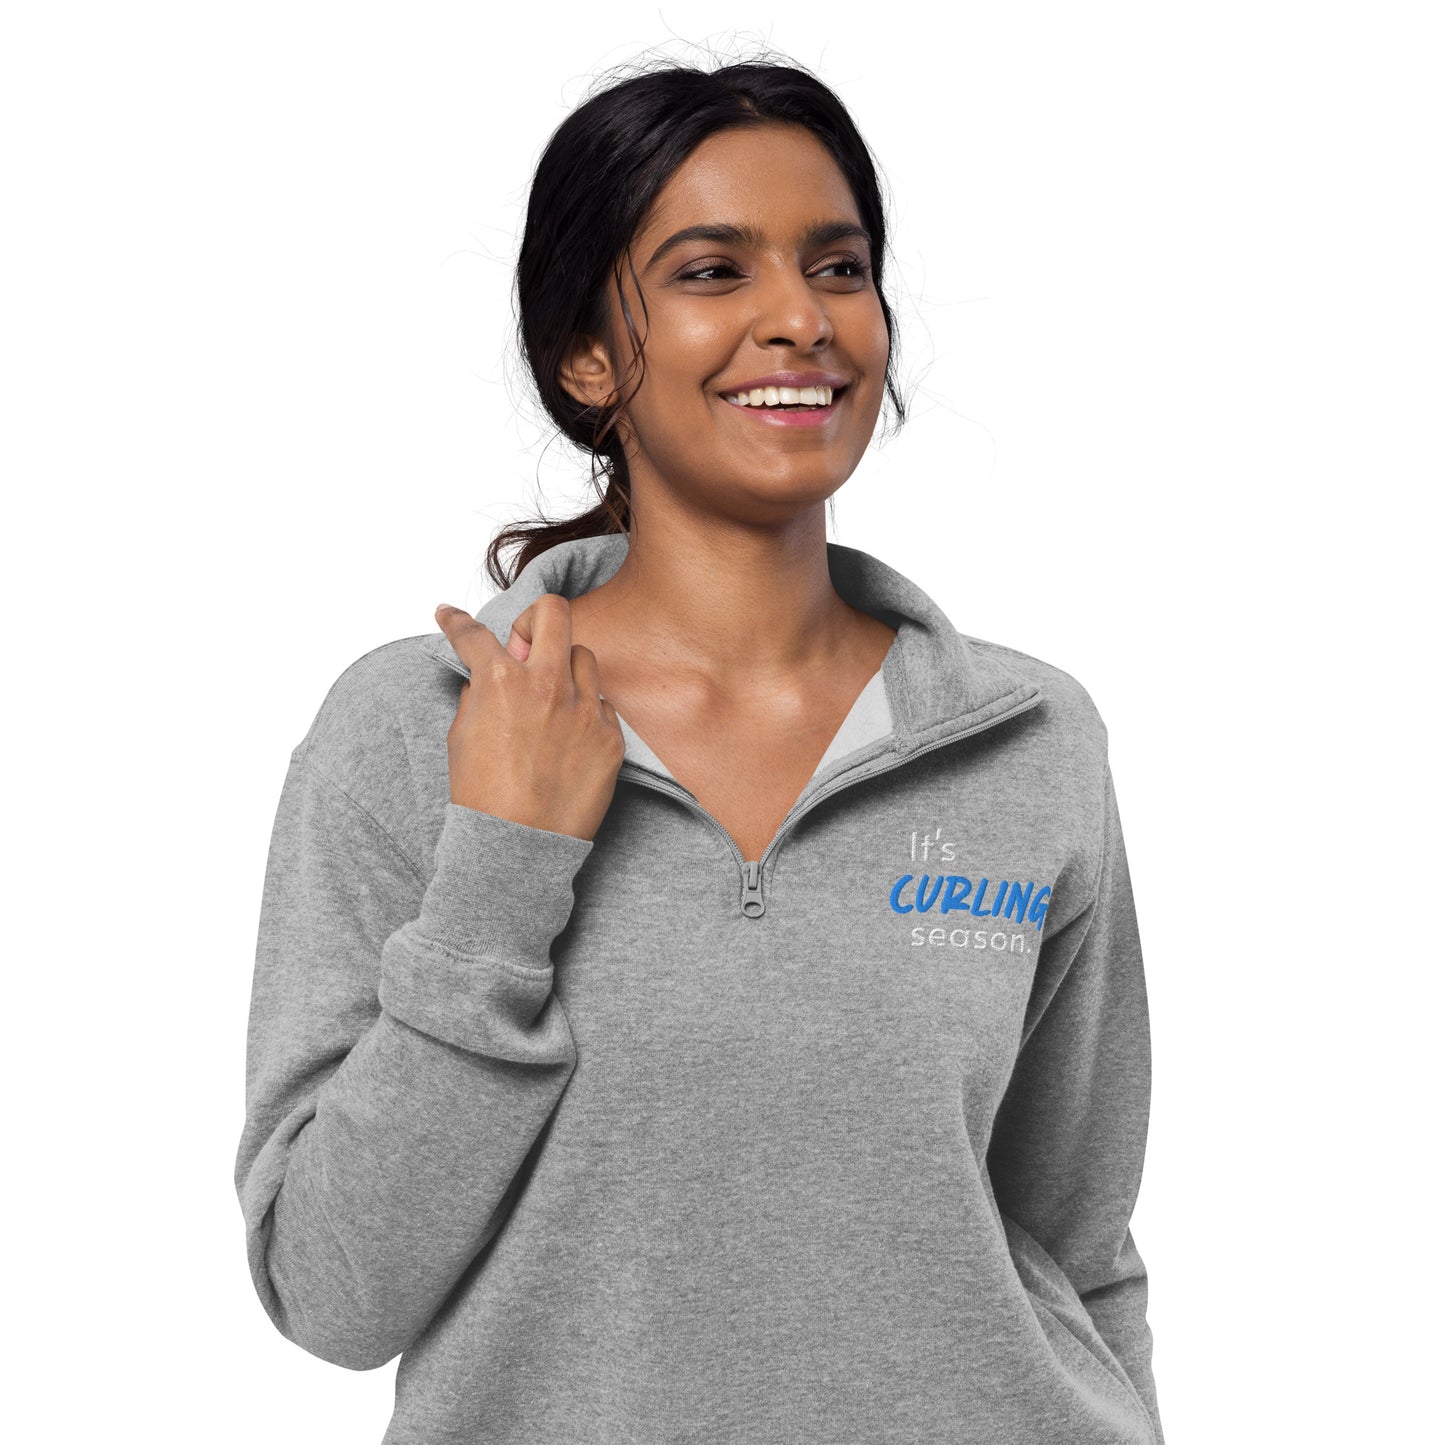 It's curling season embroidered fleece pullover